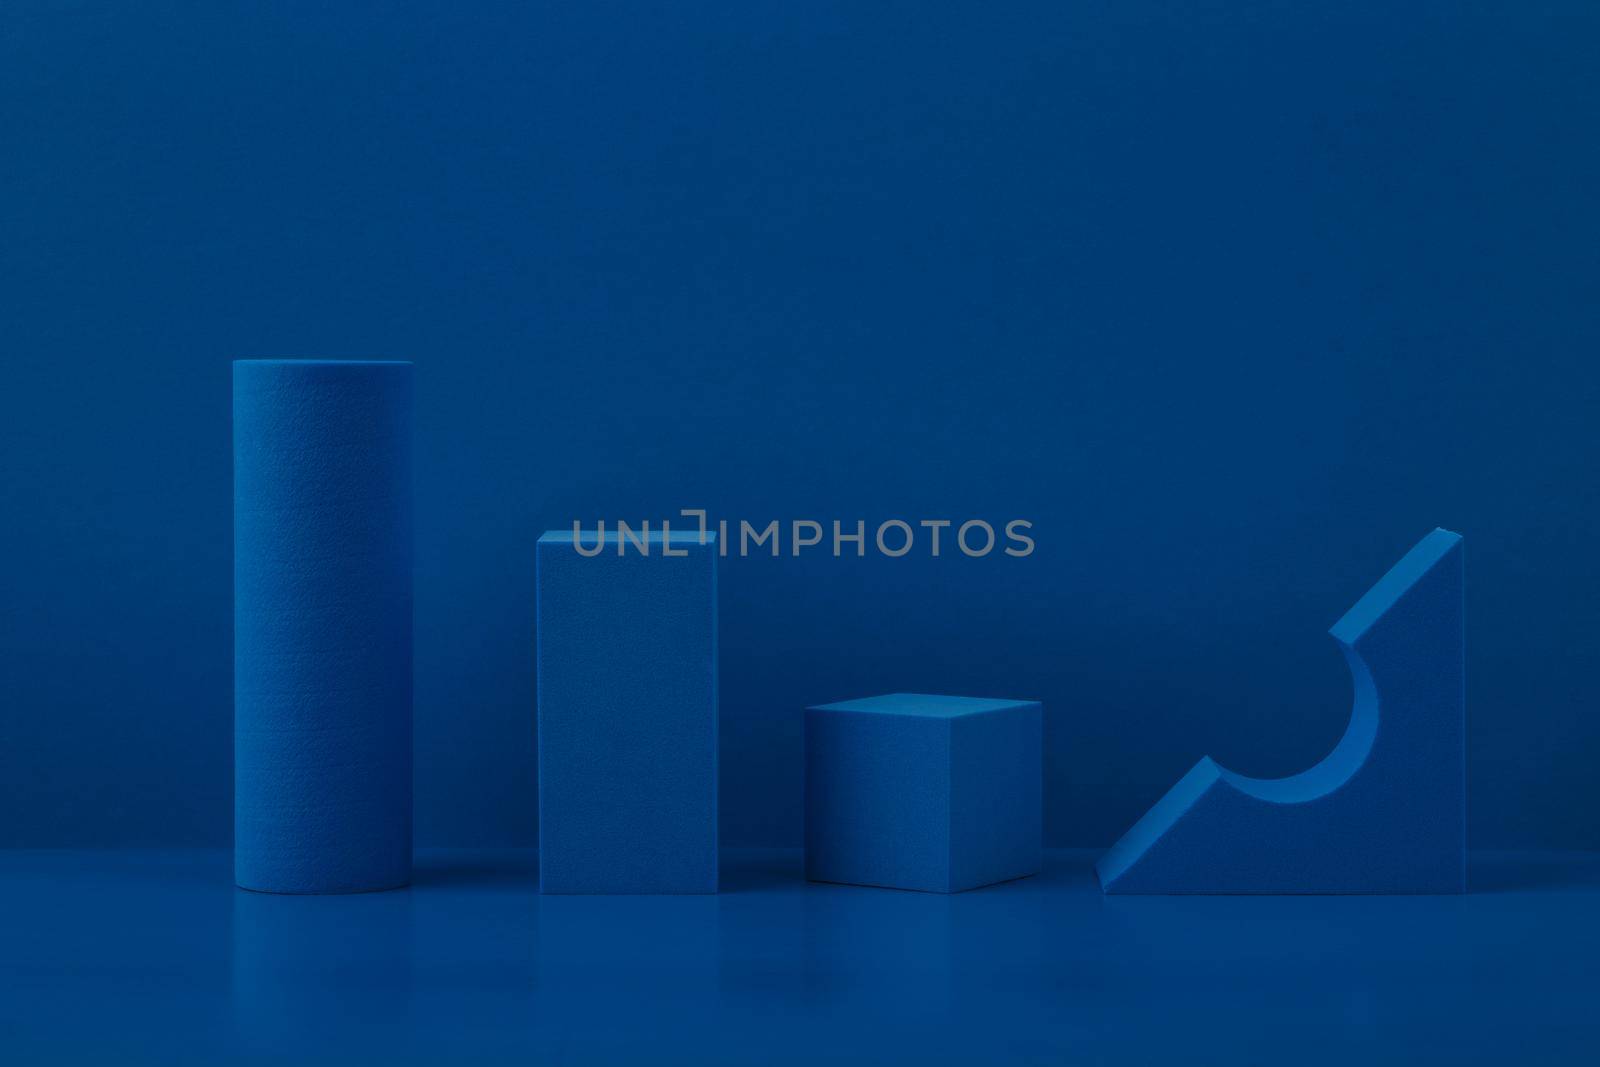 Abstract geometric composition with blue geometric figures against blue background. High quality photo